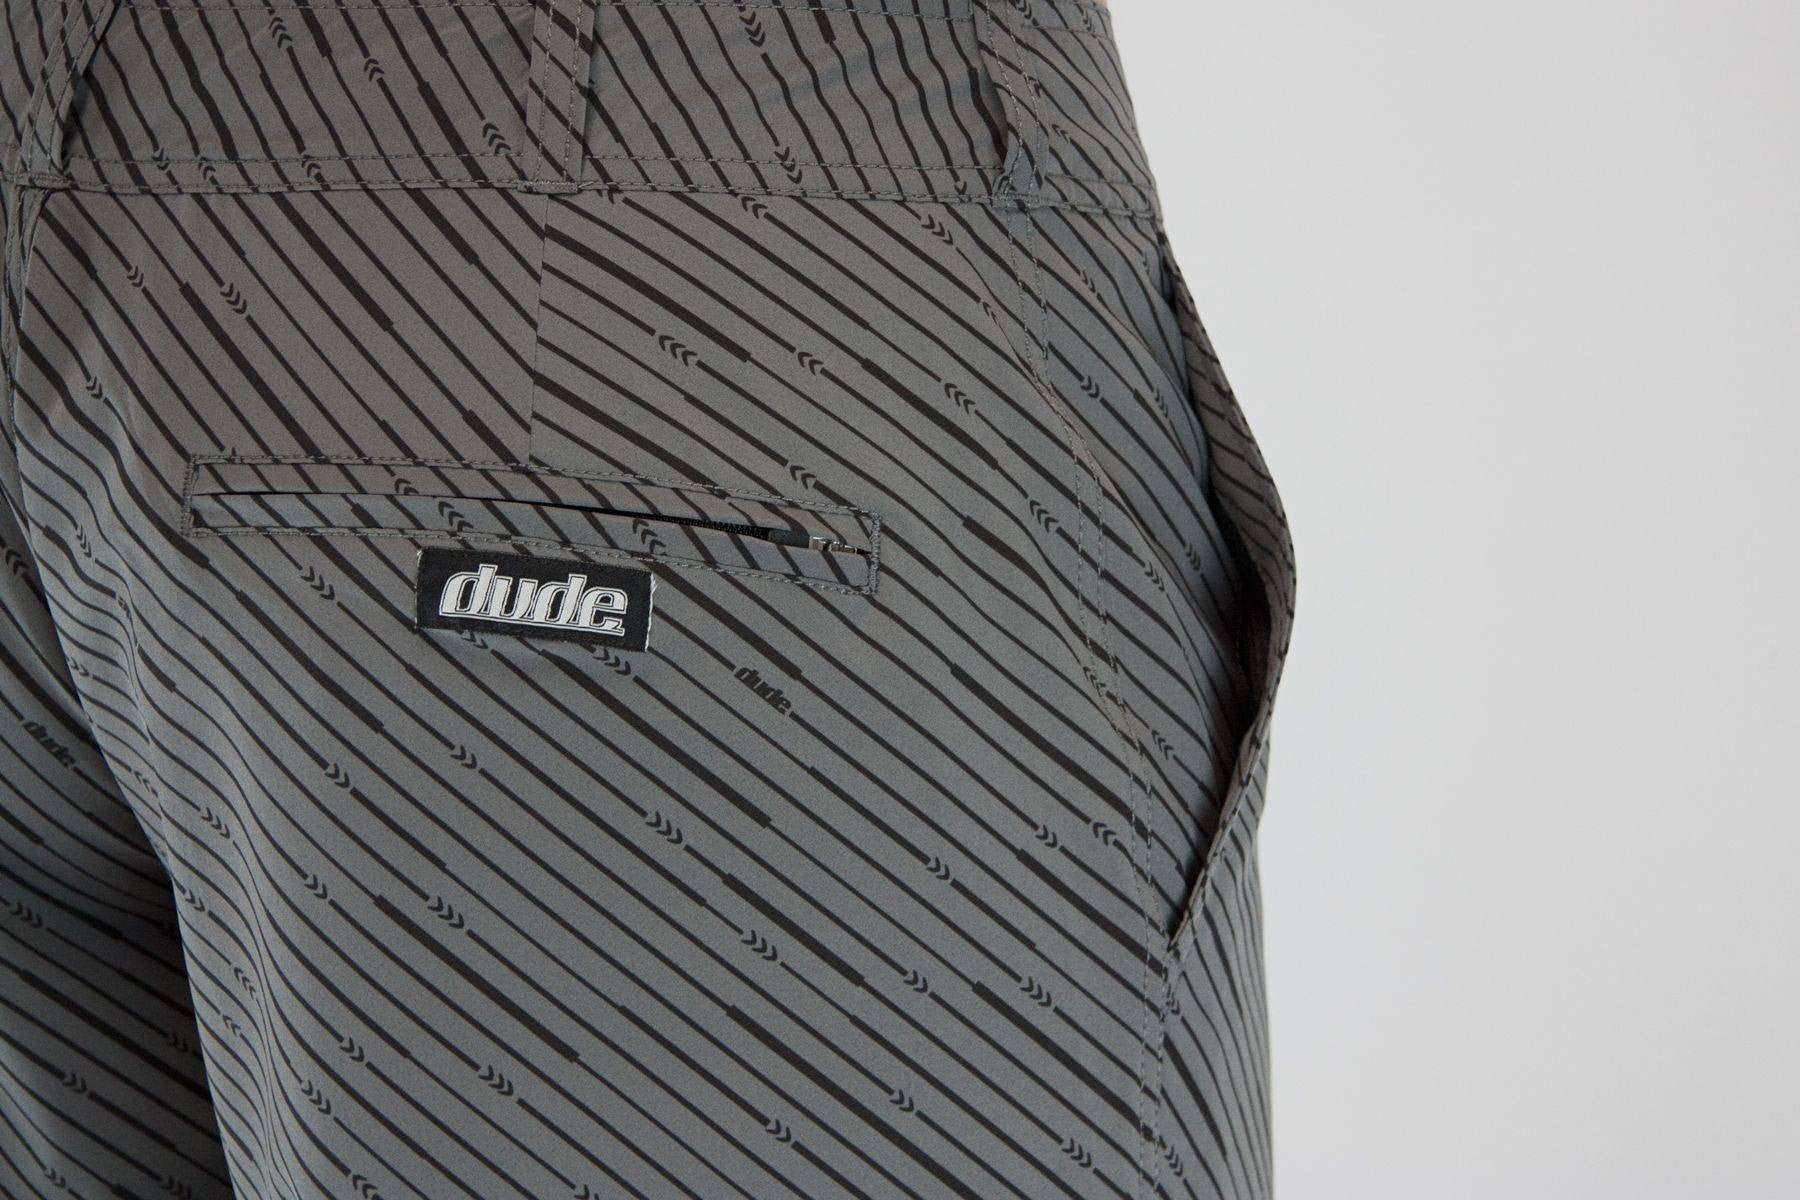 An image showing  Dude Pro Shorts 21" outleg in grey color with Zip back welt pockets